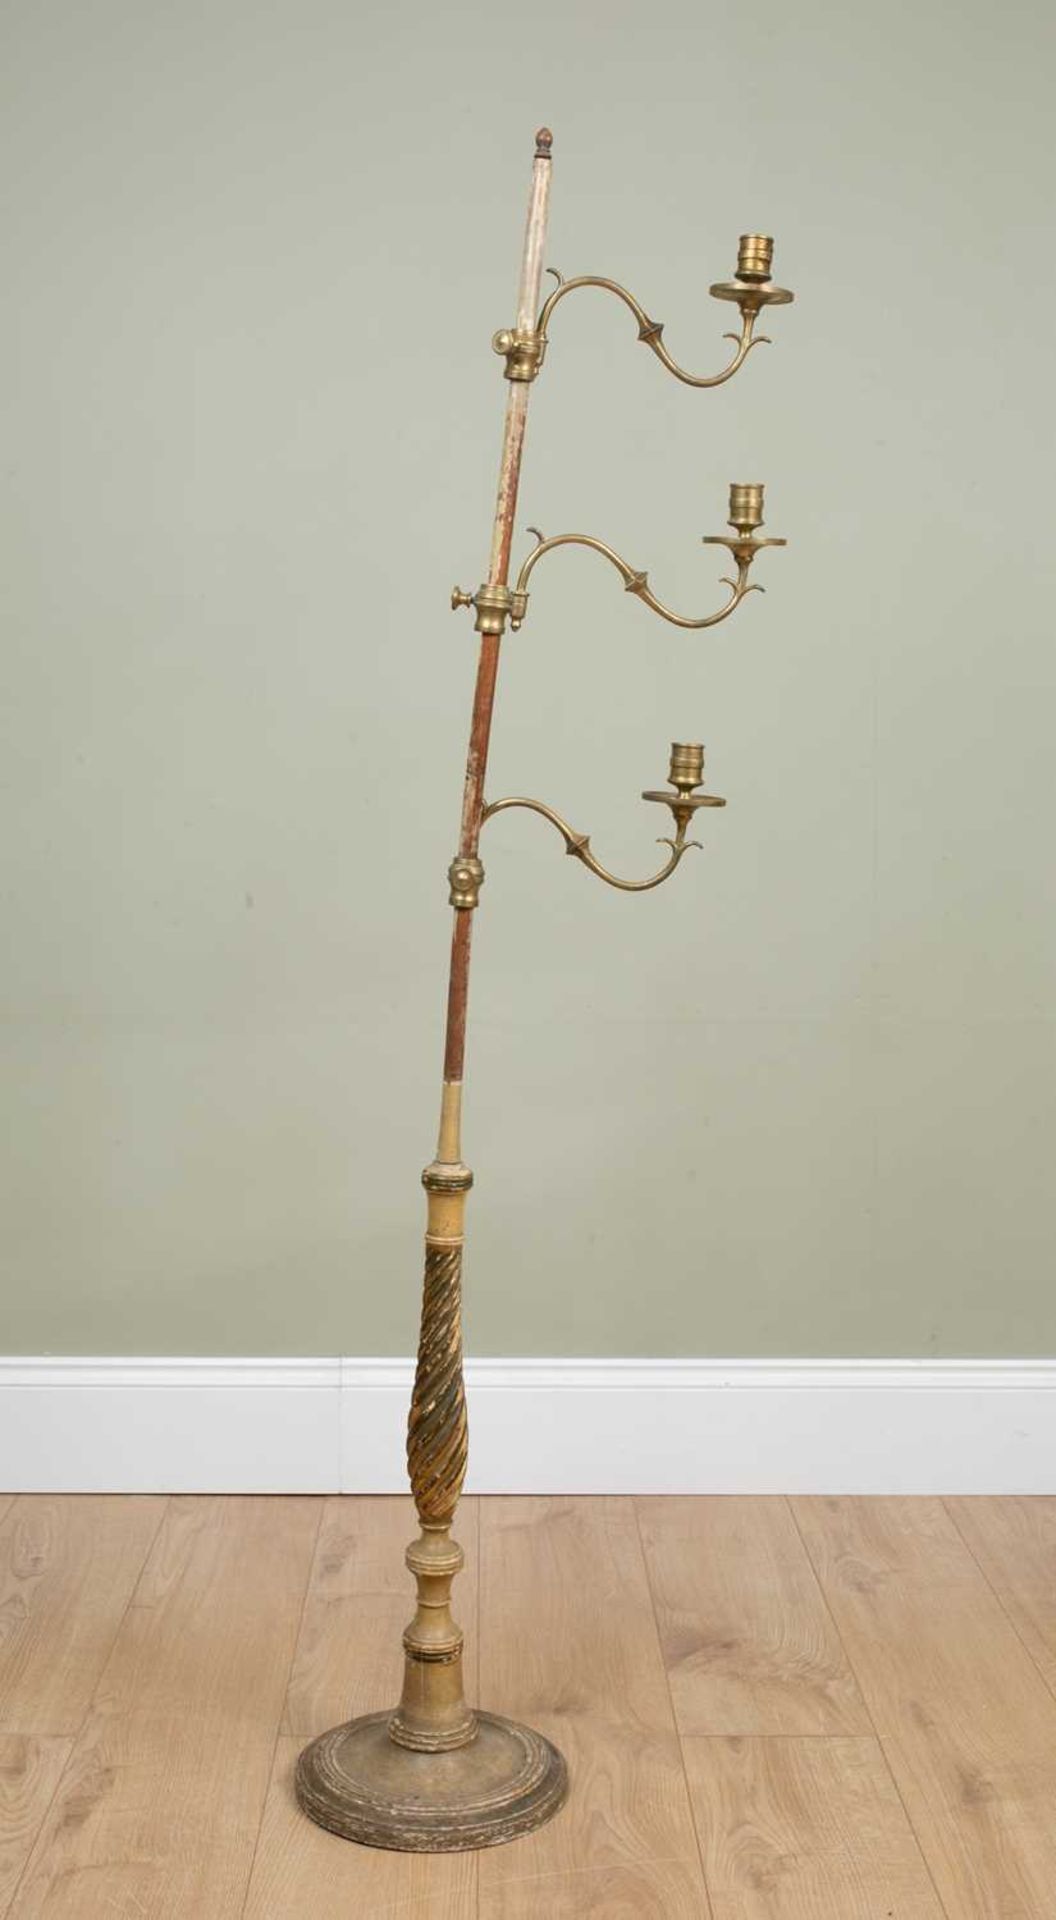 A 19th century painted wooden floor standing candle stand with three adjustable sconces, carved